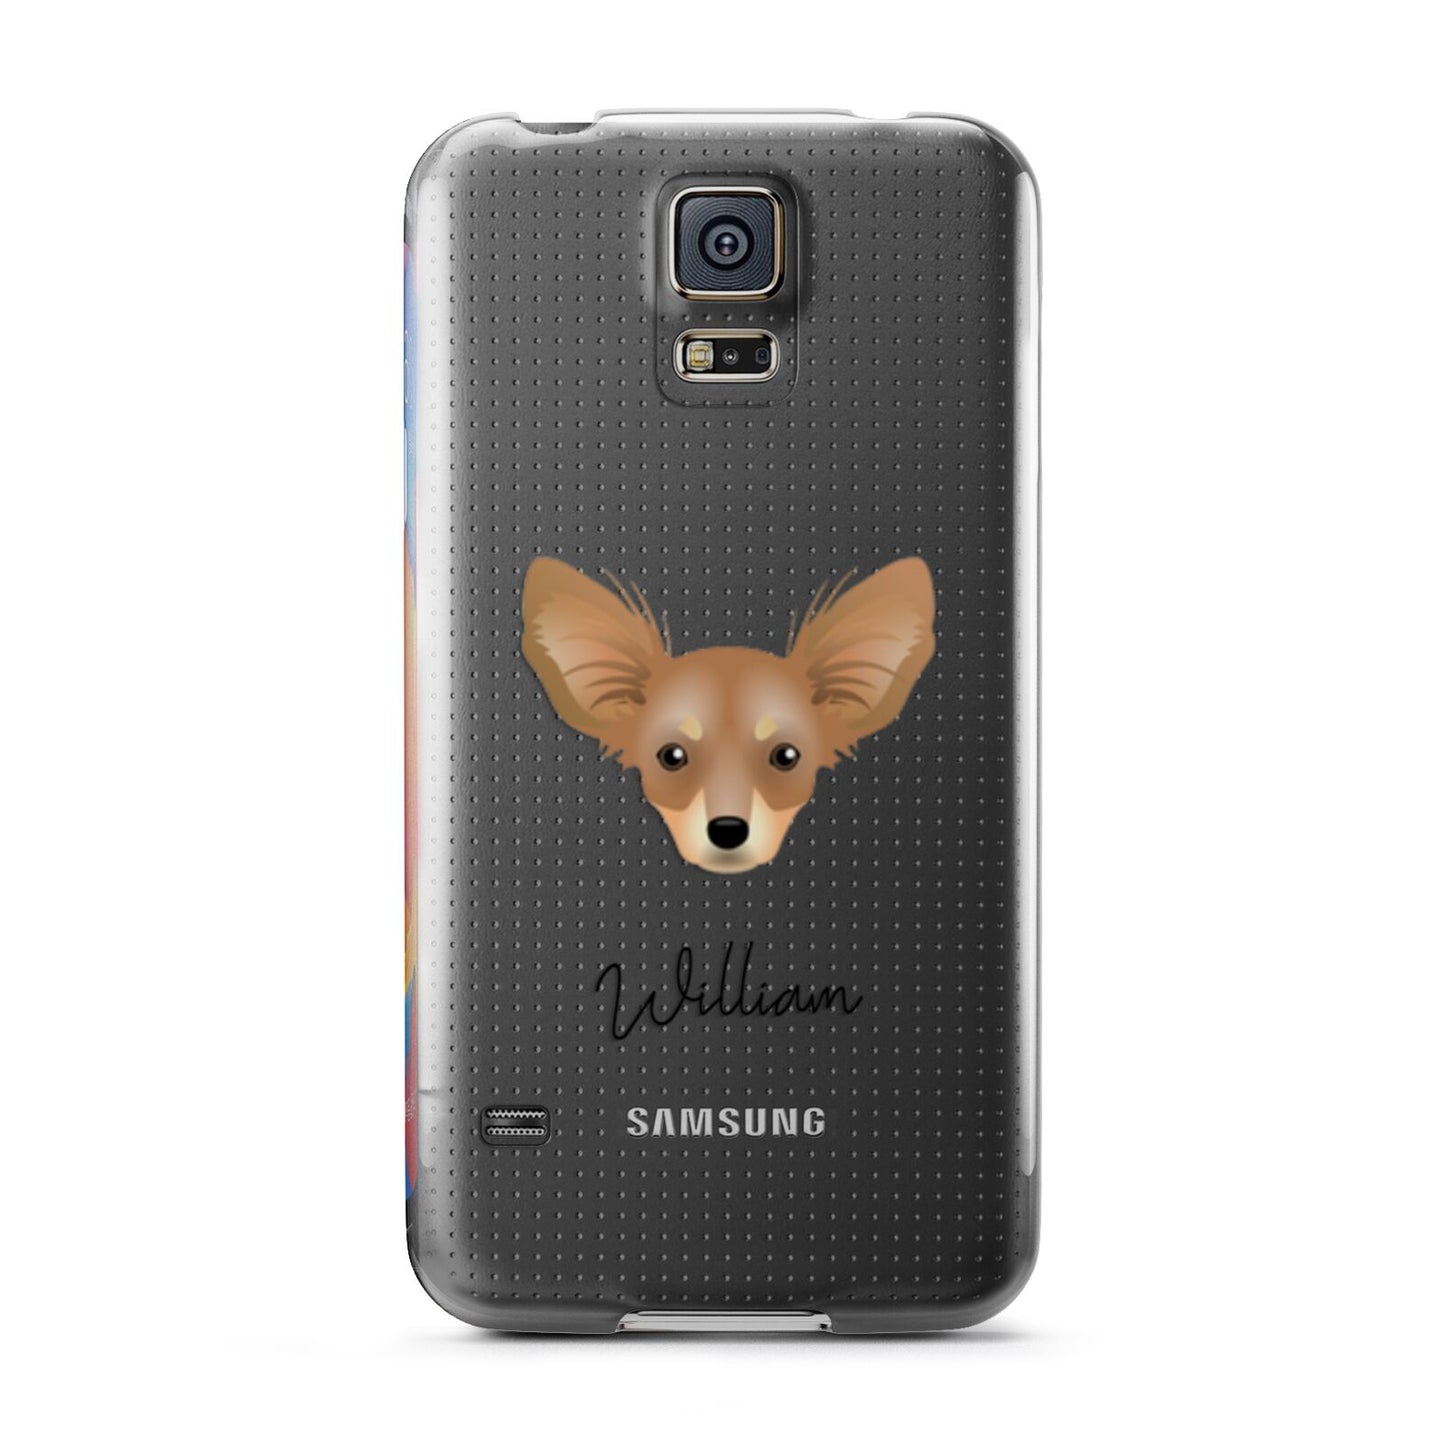 Russian Toy Personalised Samsung Galaxy S5 Case